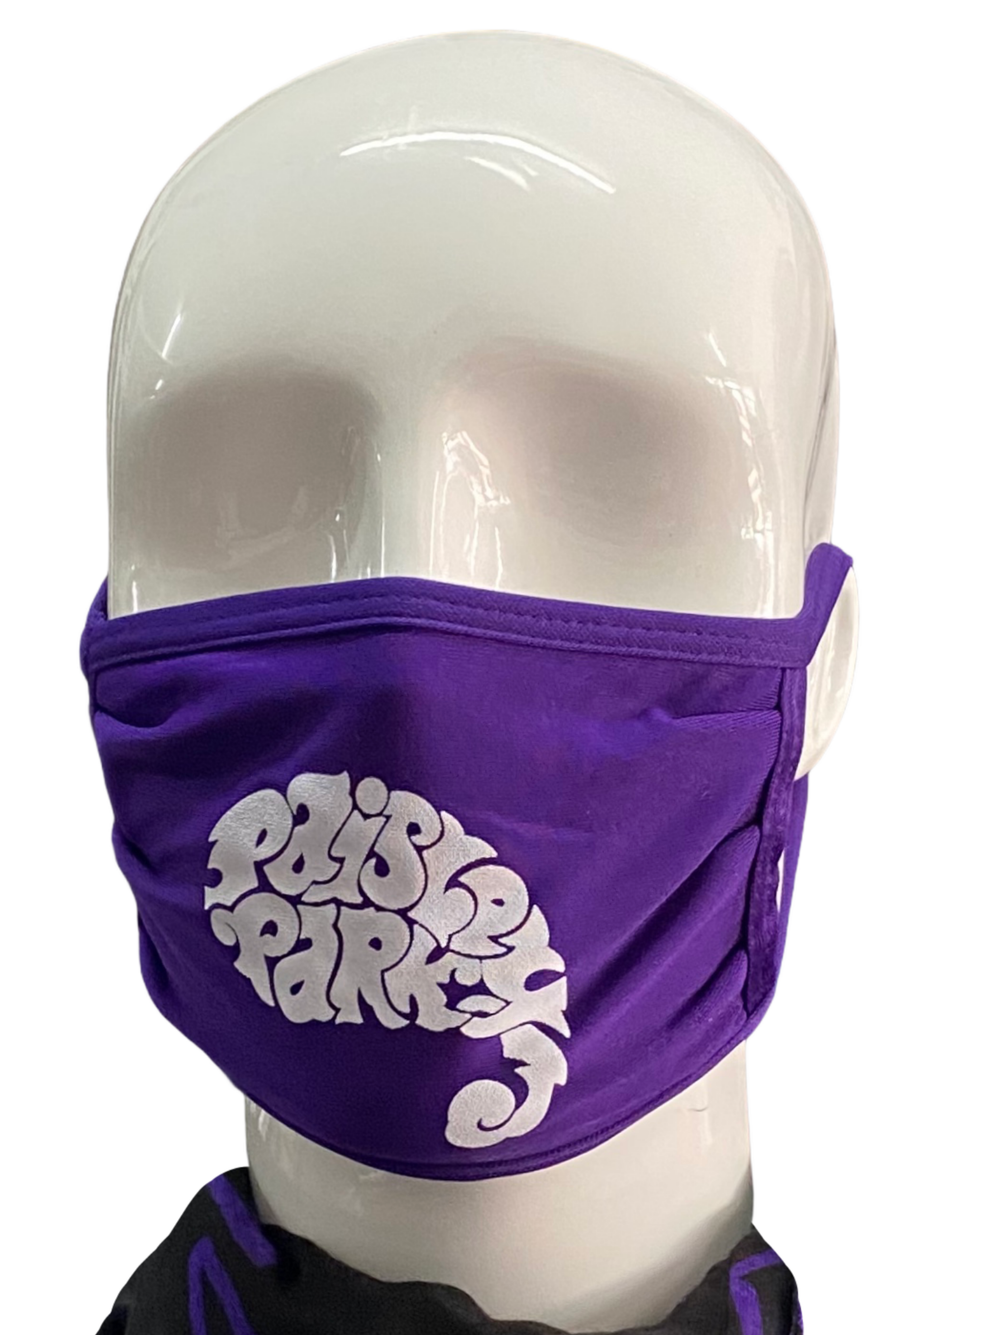 Prince – Paisley Park Official Merchandise Face Mask NEW